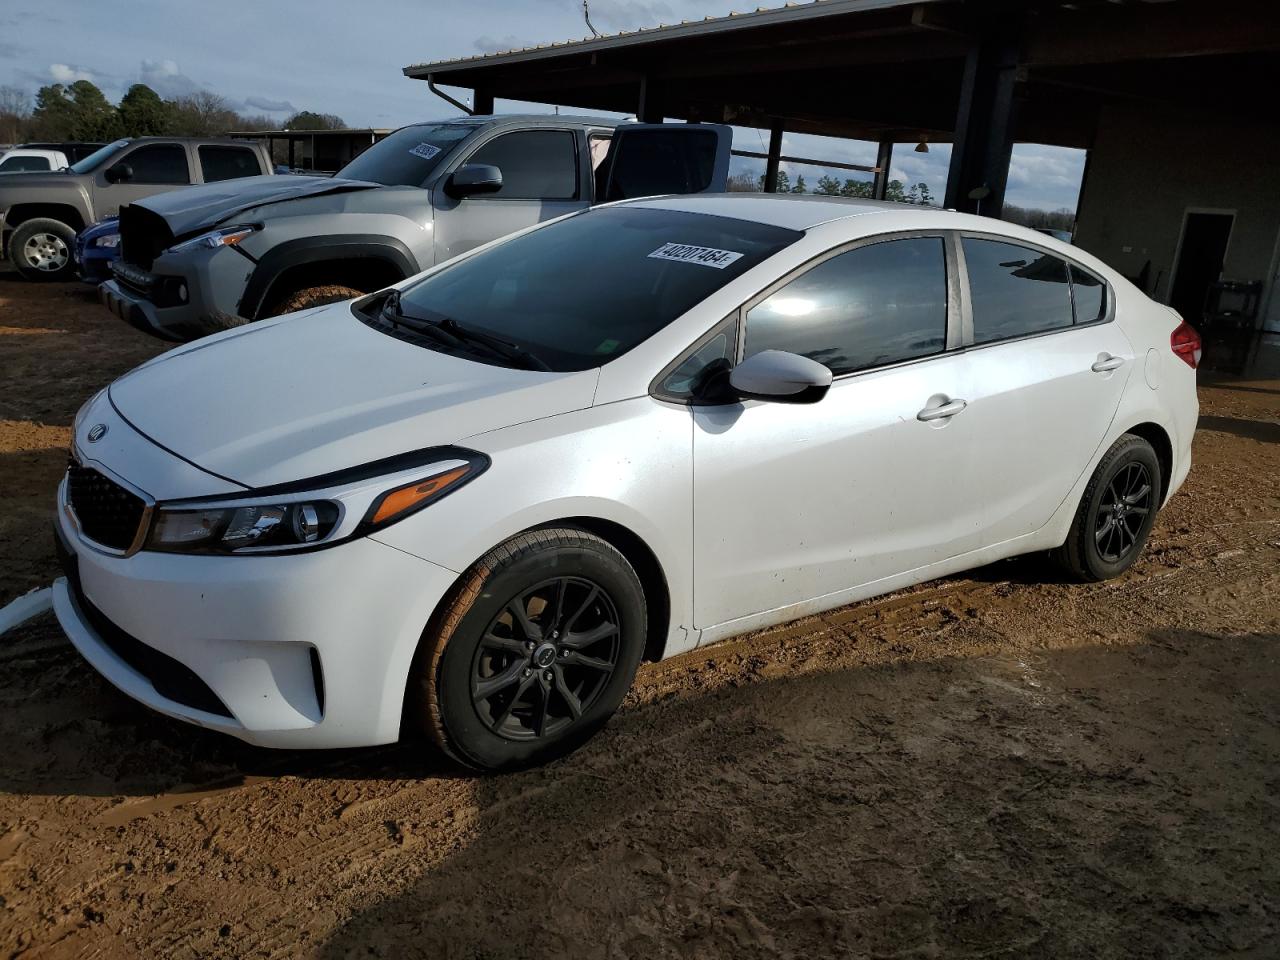 3KPFL4A75HE****** Salvage and Wrecked 2017 Kia Forte in AL - Tanner